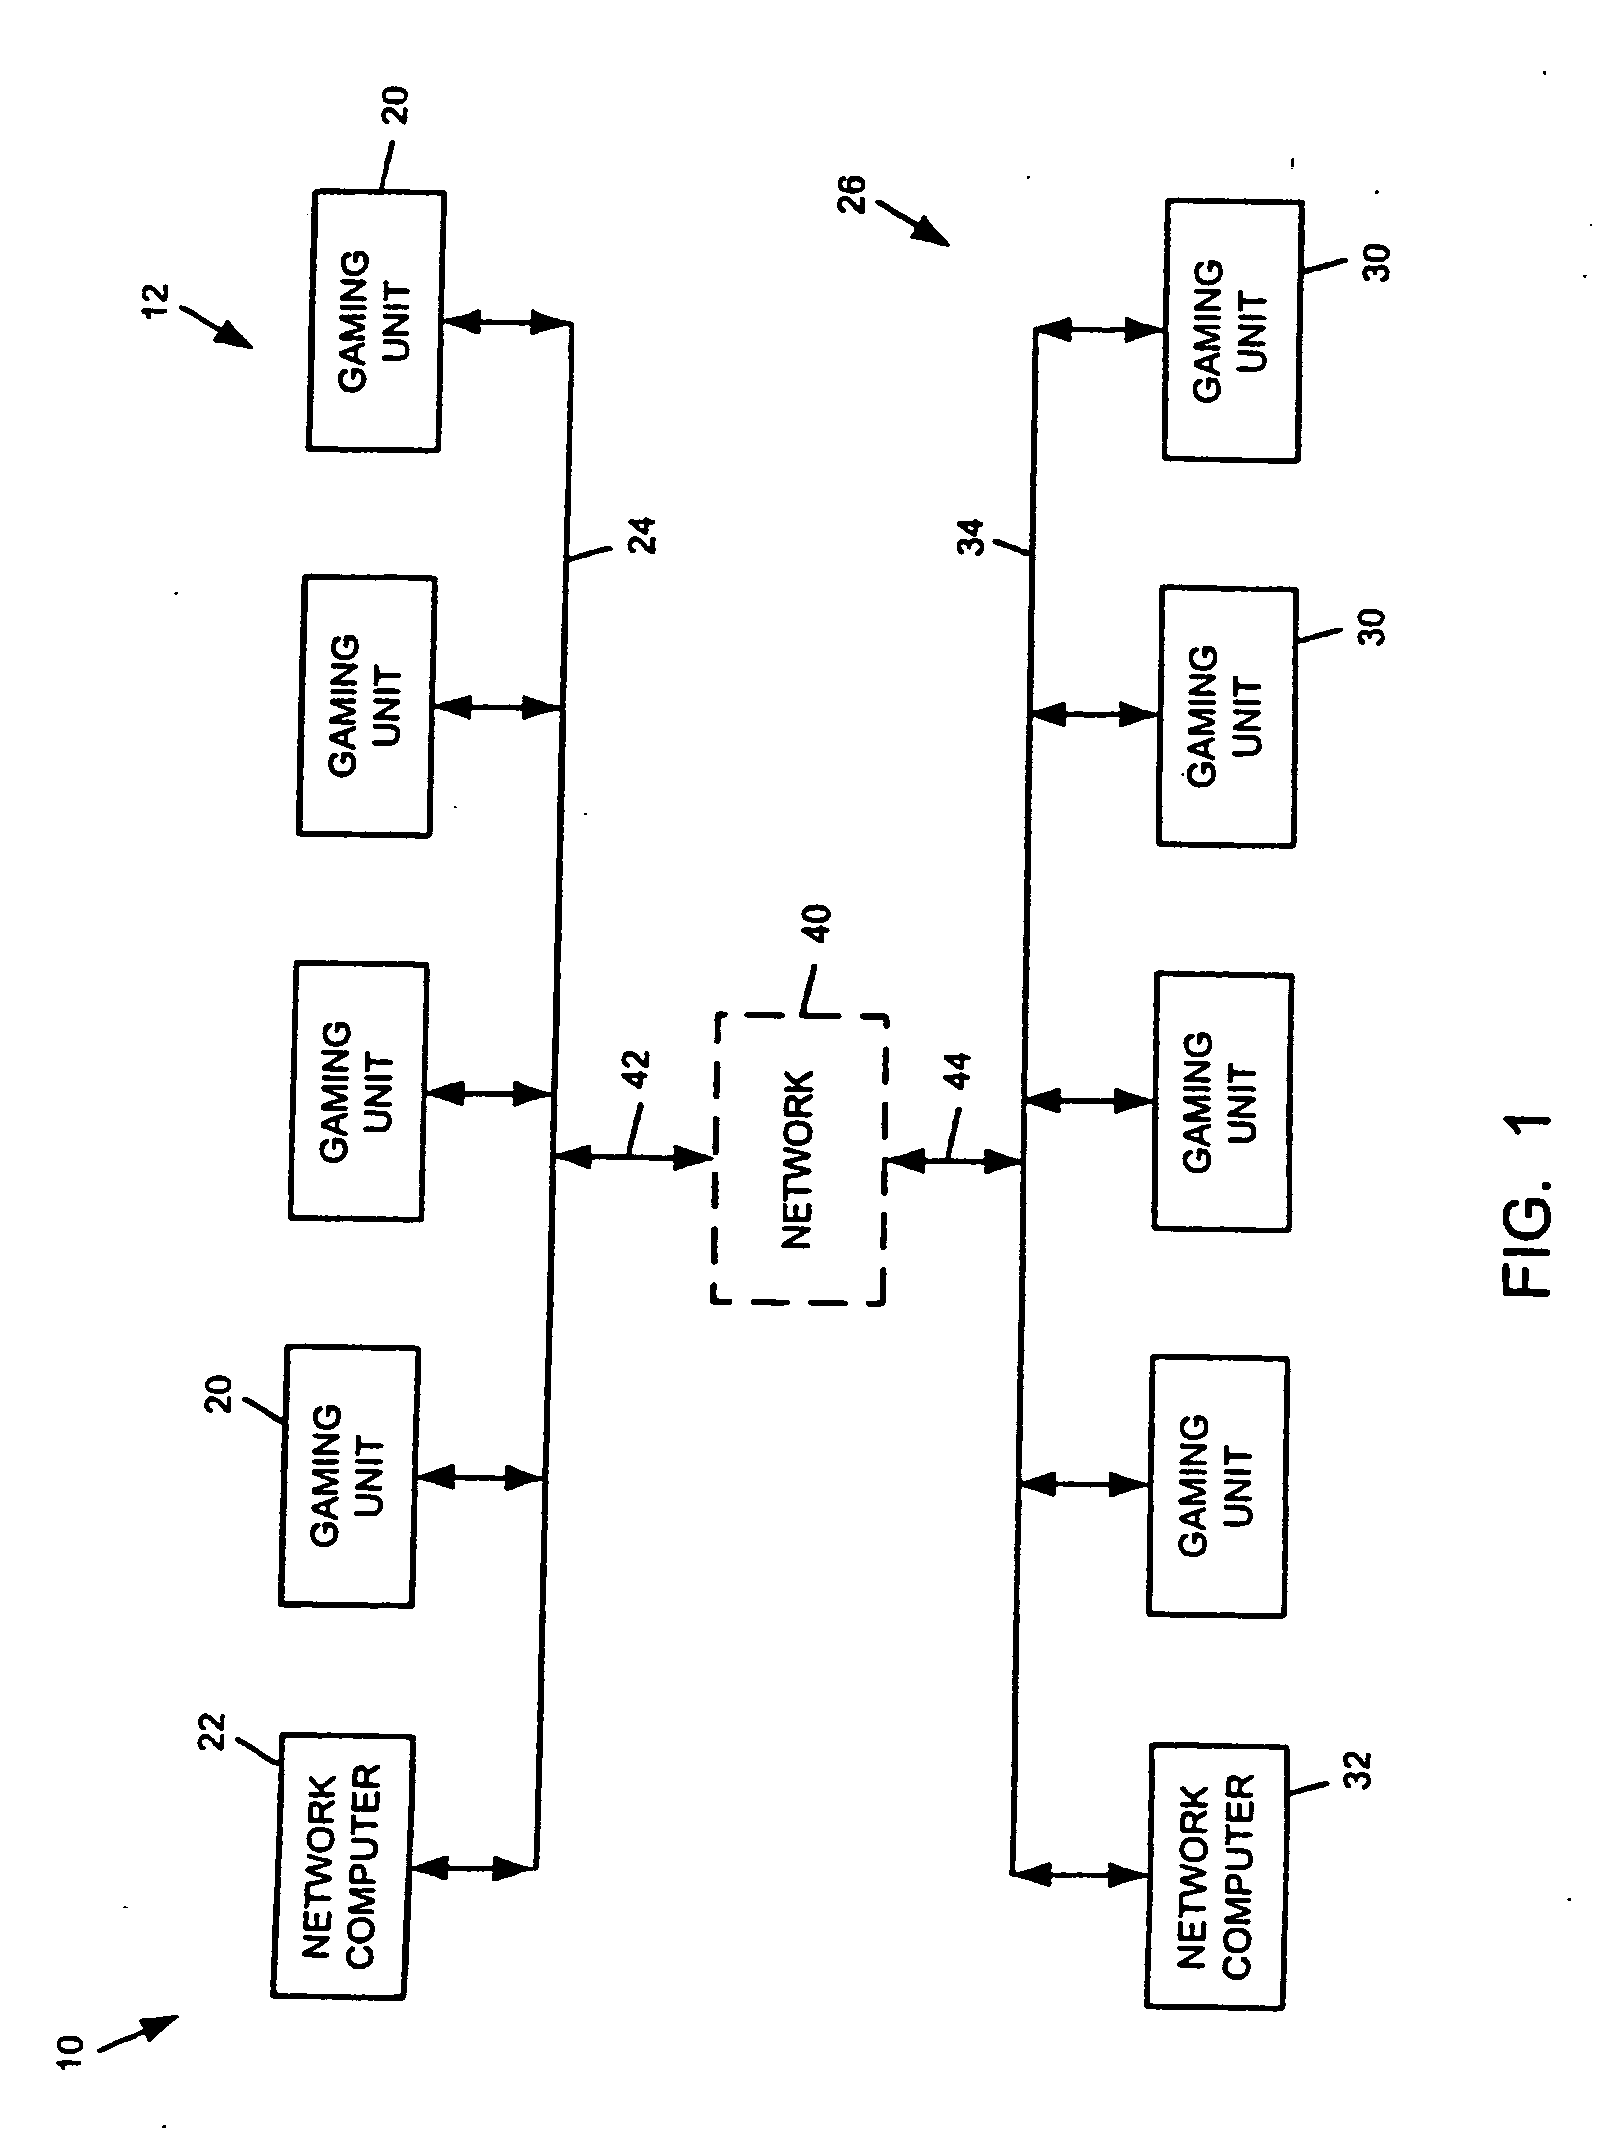 Apparatus and methods for continuous game play during a lockup in a gaming apparatus